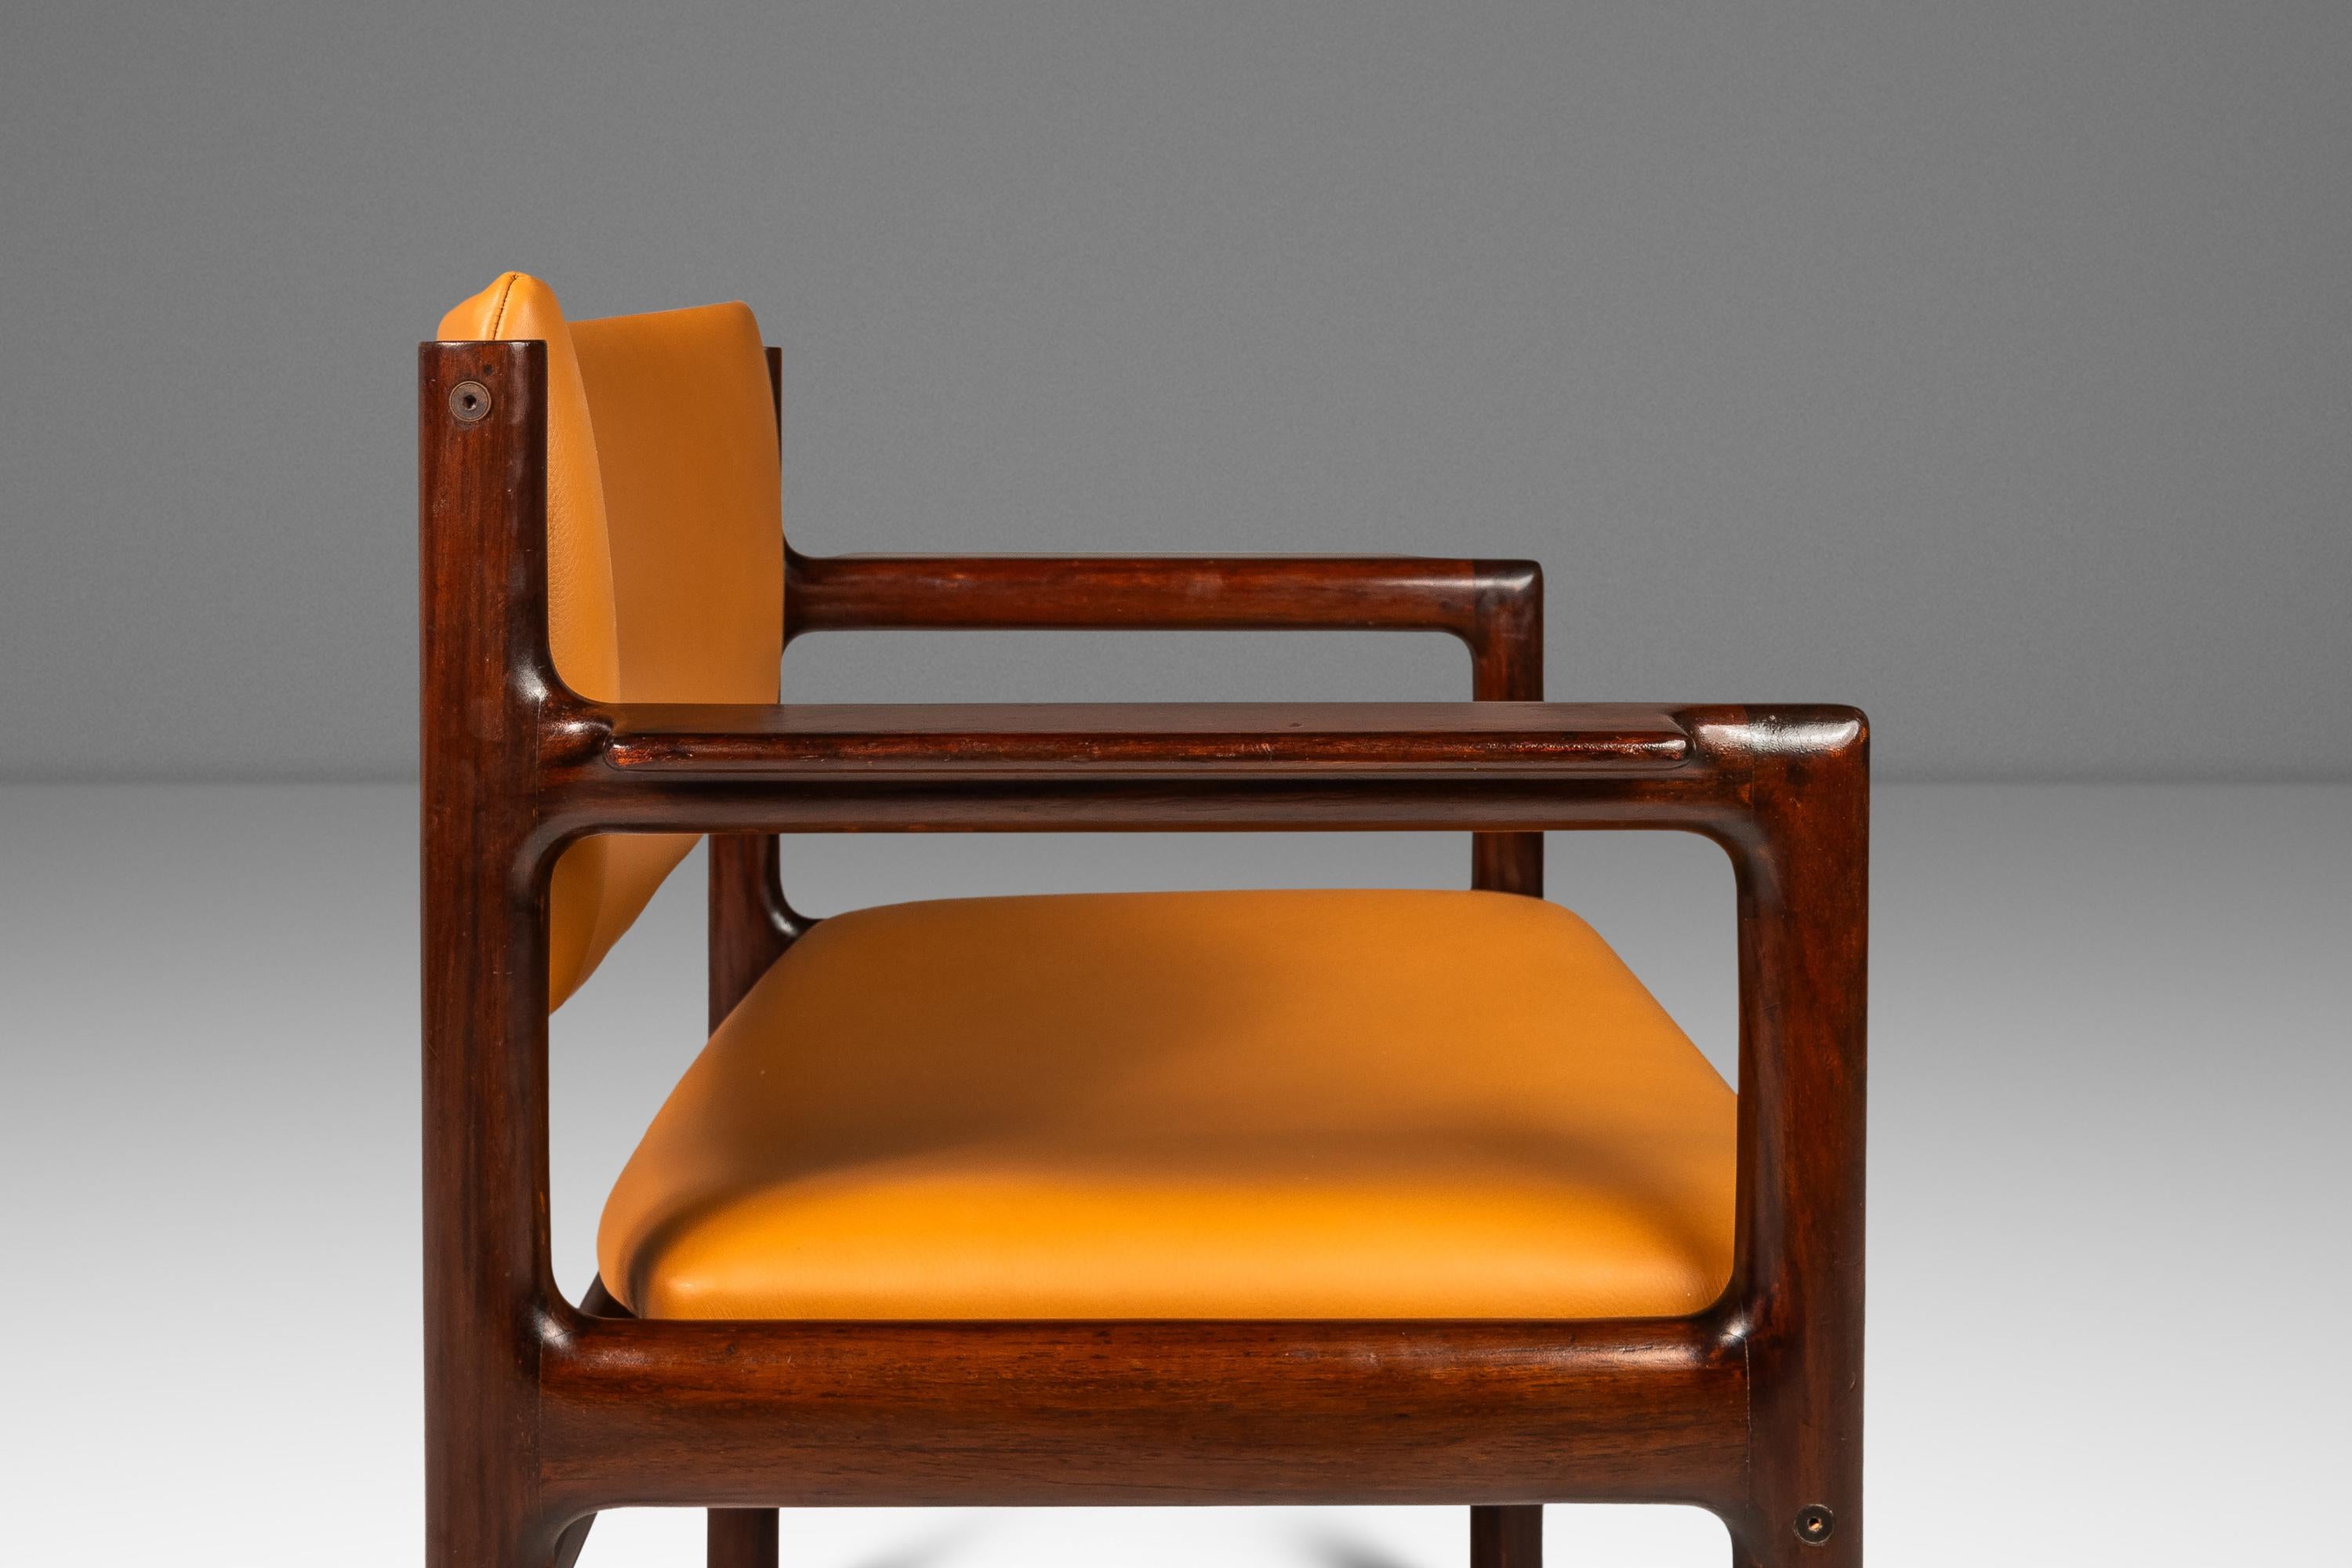 Set of 2 Mahogany & Leather Arm Chairs, Danish Overseas Imports, c. 1960's For Sale 10